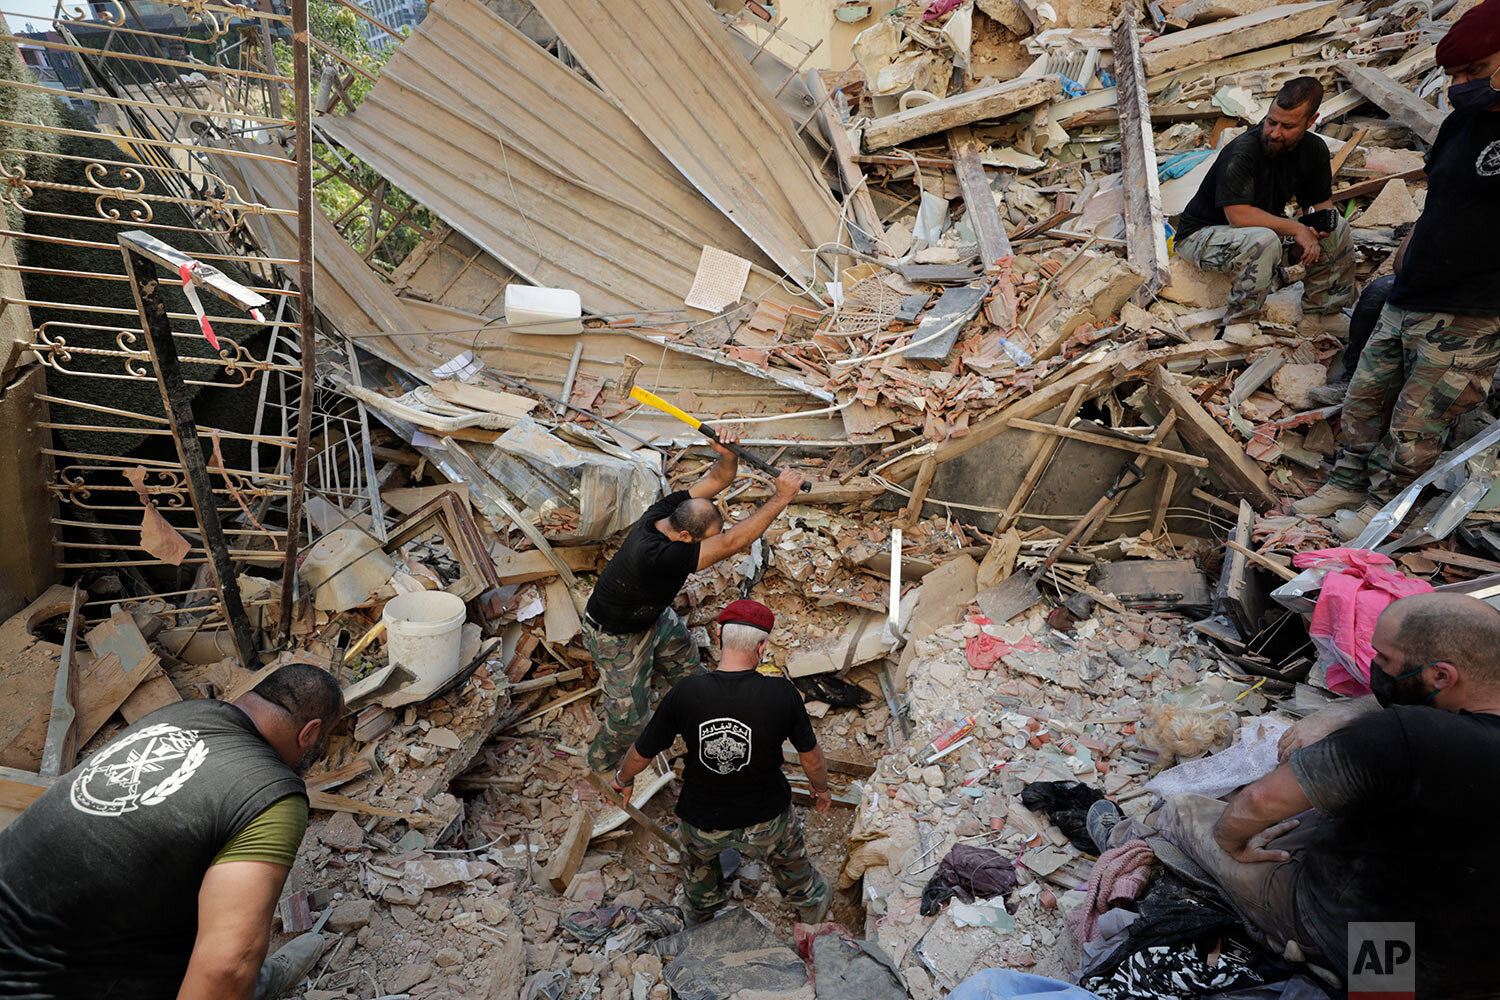  Lebanese soldiers search for survivors after a massive explosion in Beirut, Lebanon, Wednesday, Aug. 5, 2020. (AP Photo/Hassan Ammar) 